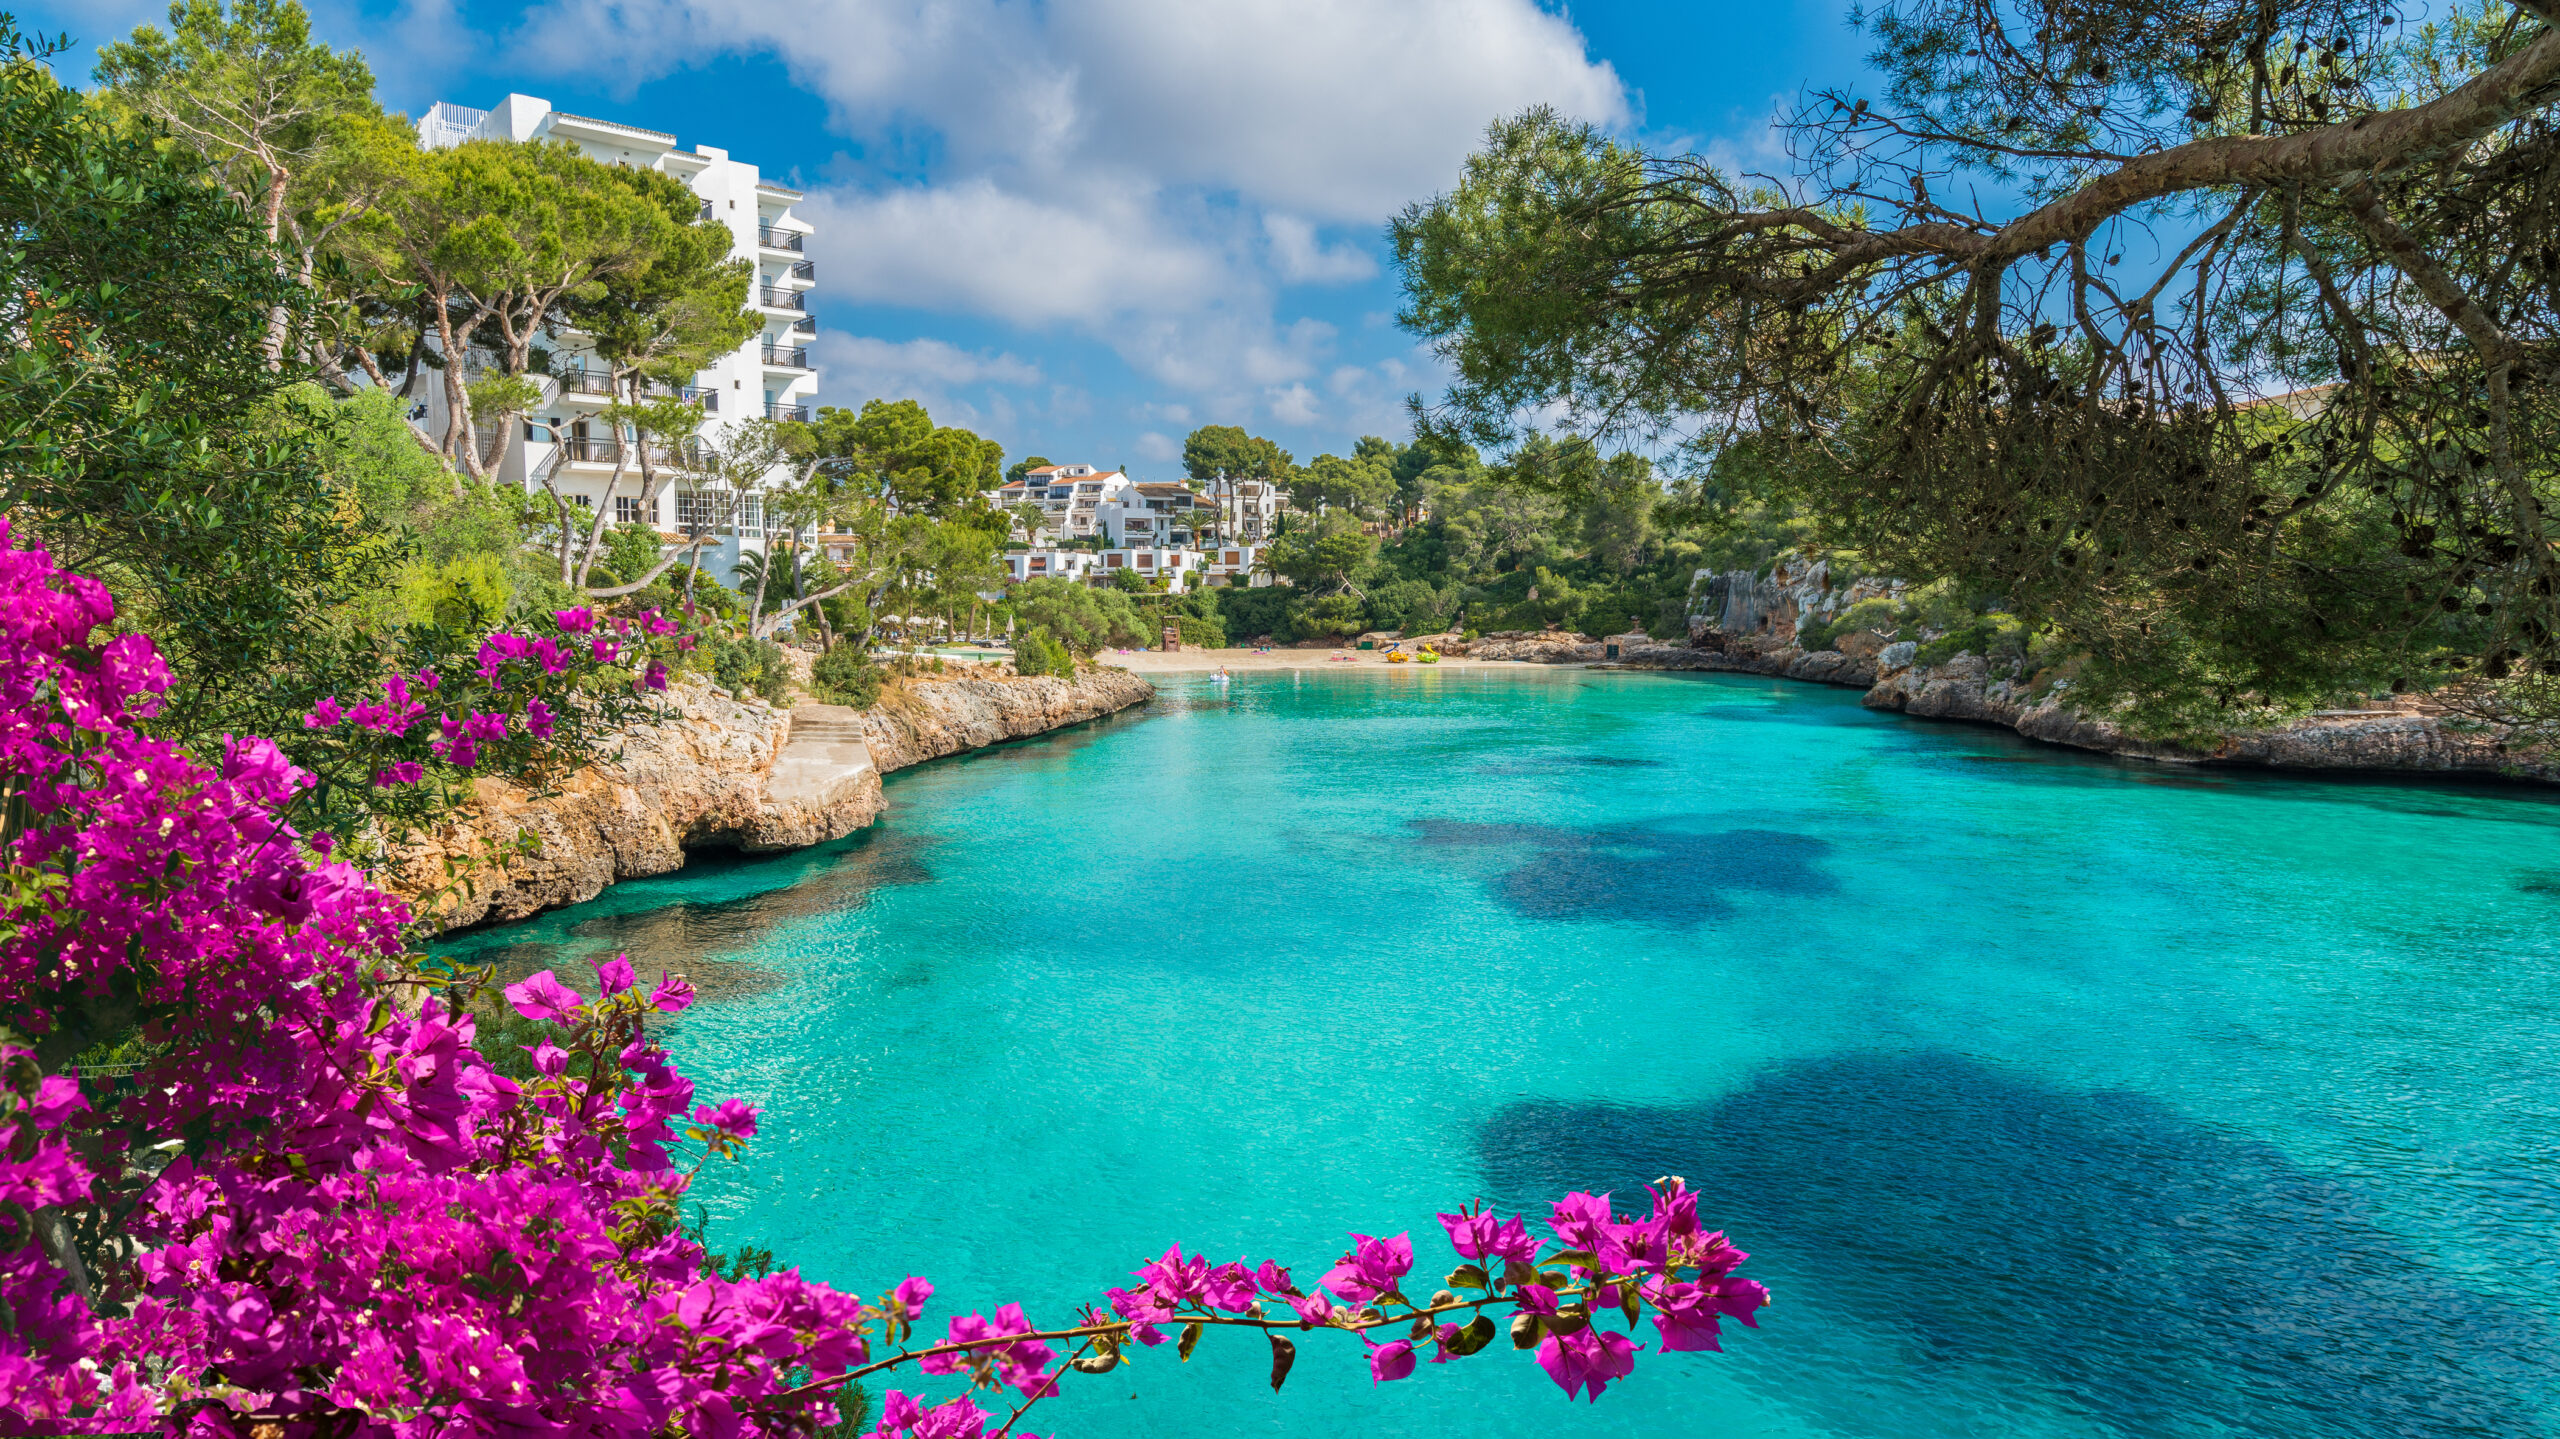 Balearic Islands: Experience the magic of the unspoiled natural beauty